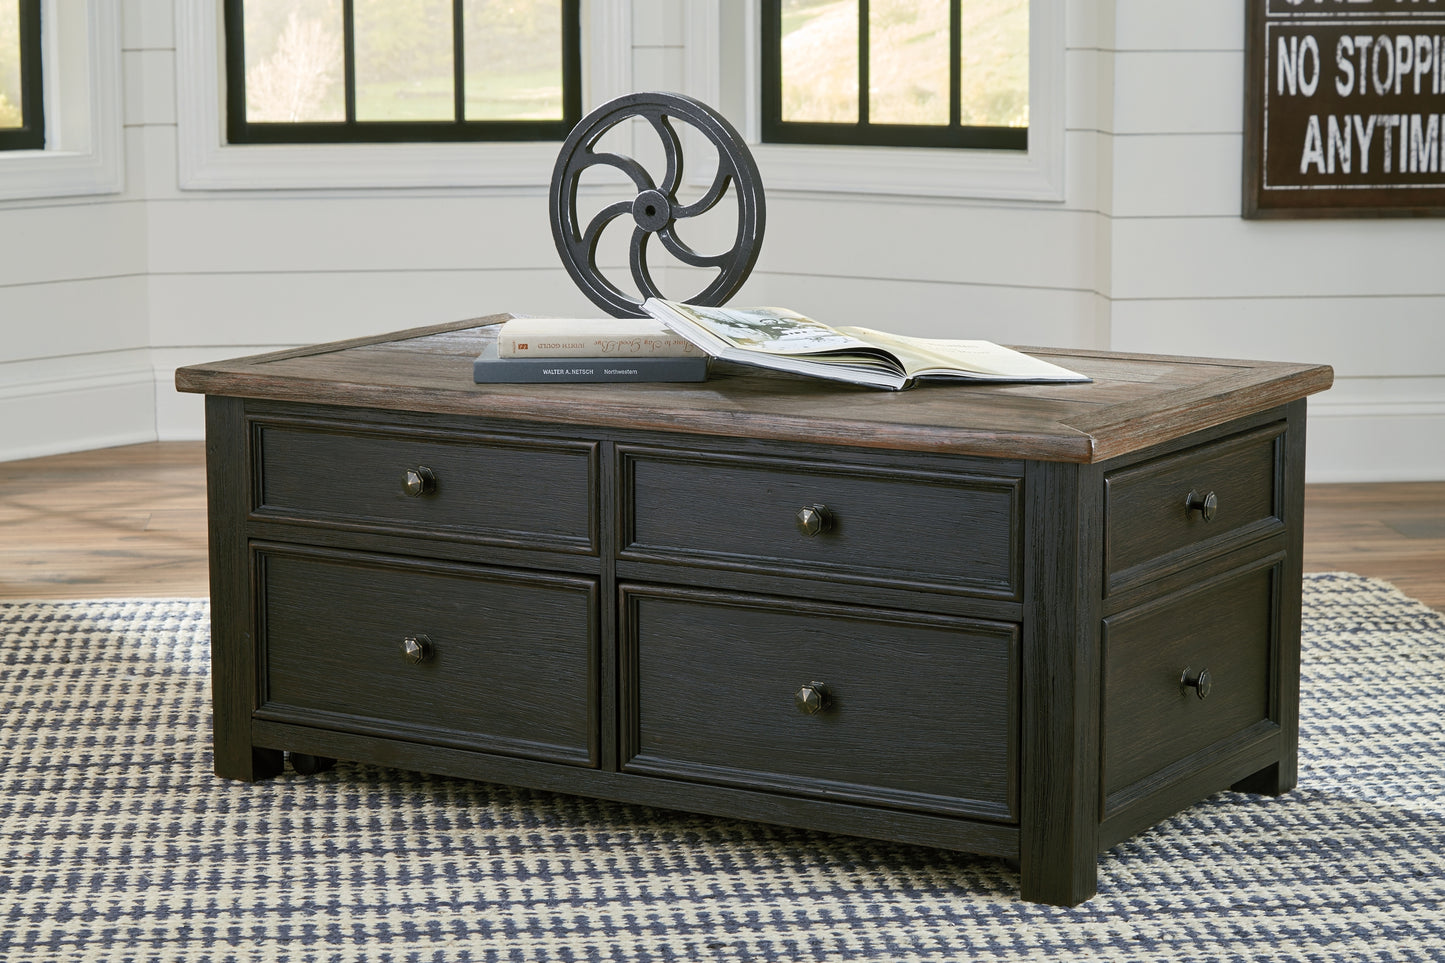 Tyler Creek Coffee Table with 2 End Tables